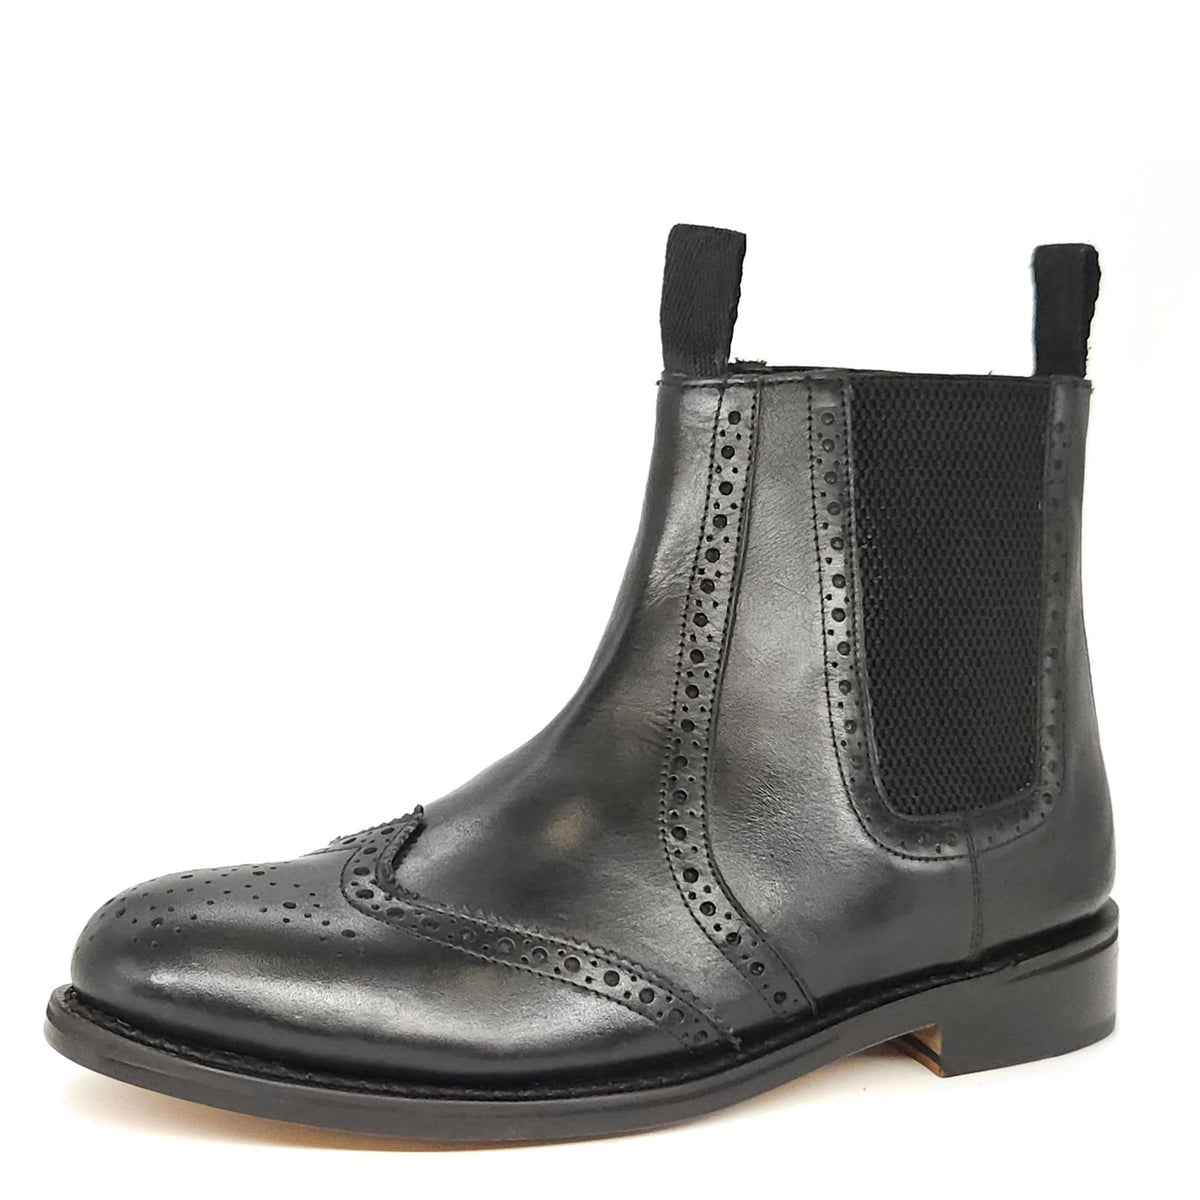 Frank James Benchgrade Ludlow Leather Sole Welted Chelsea Brogue Dealer Boots